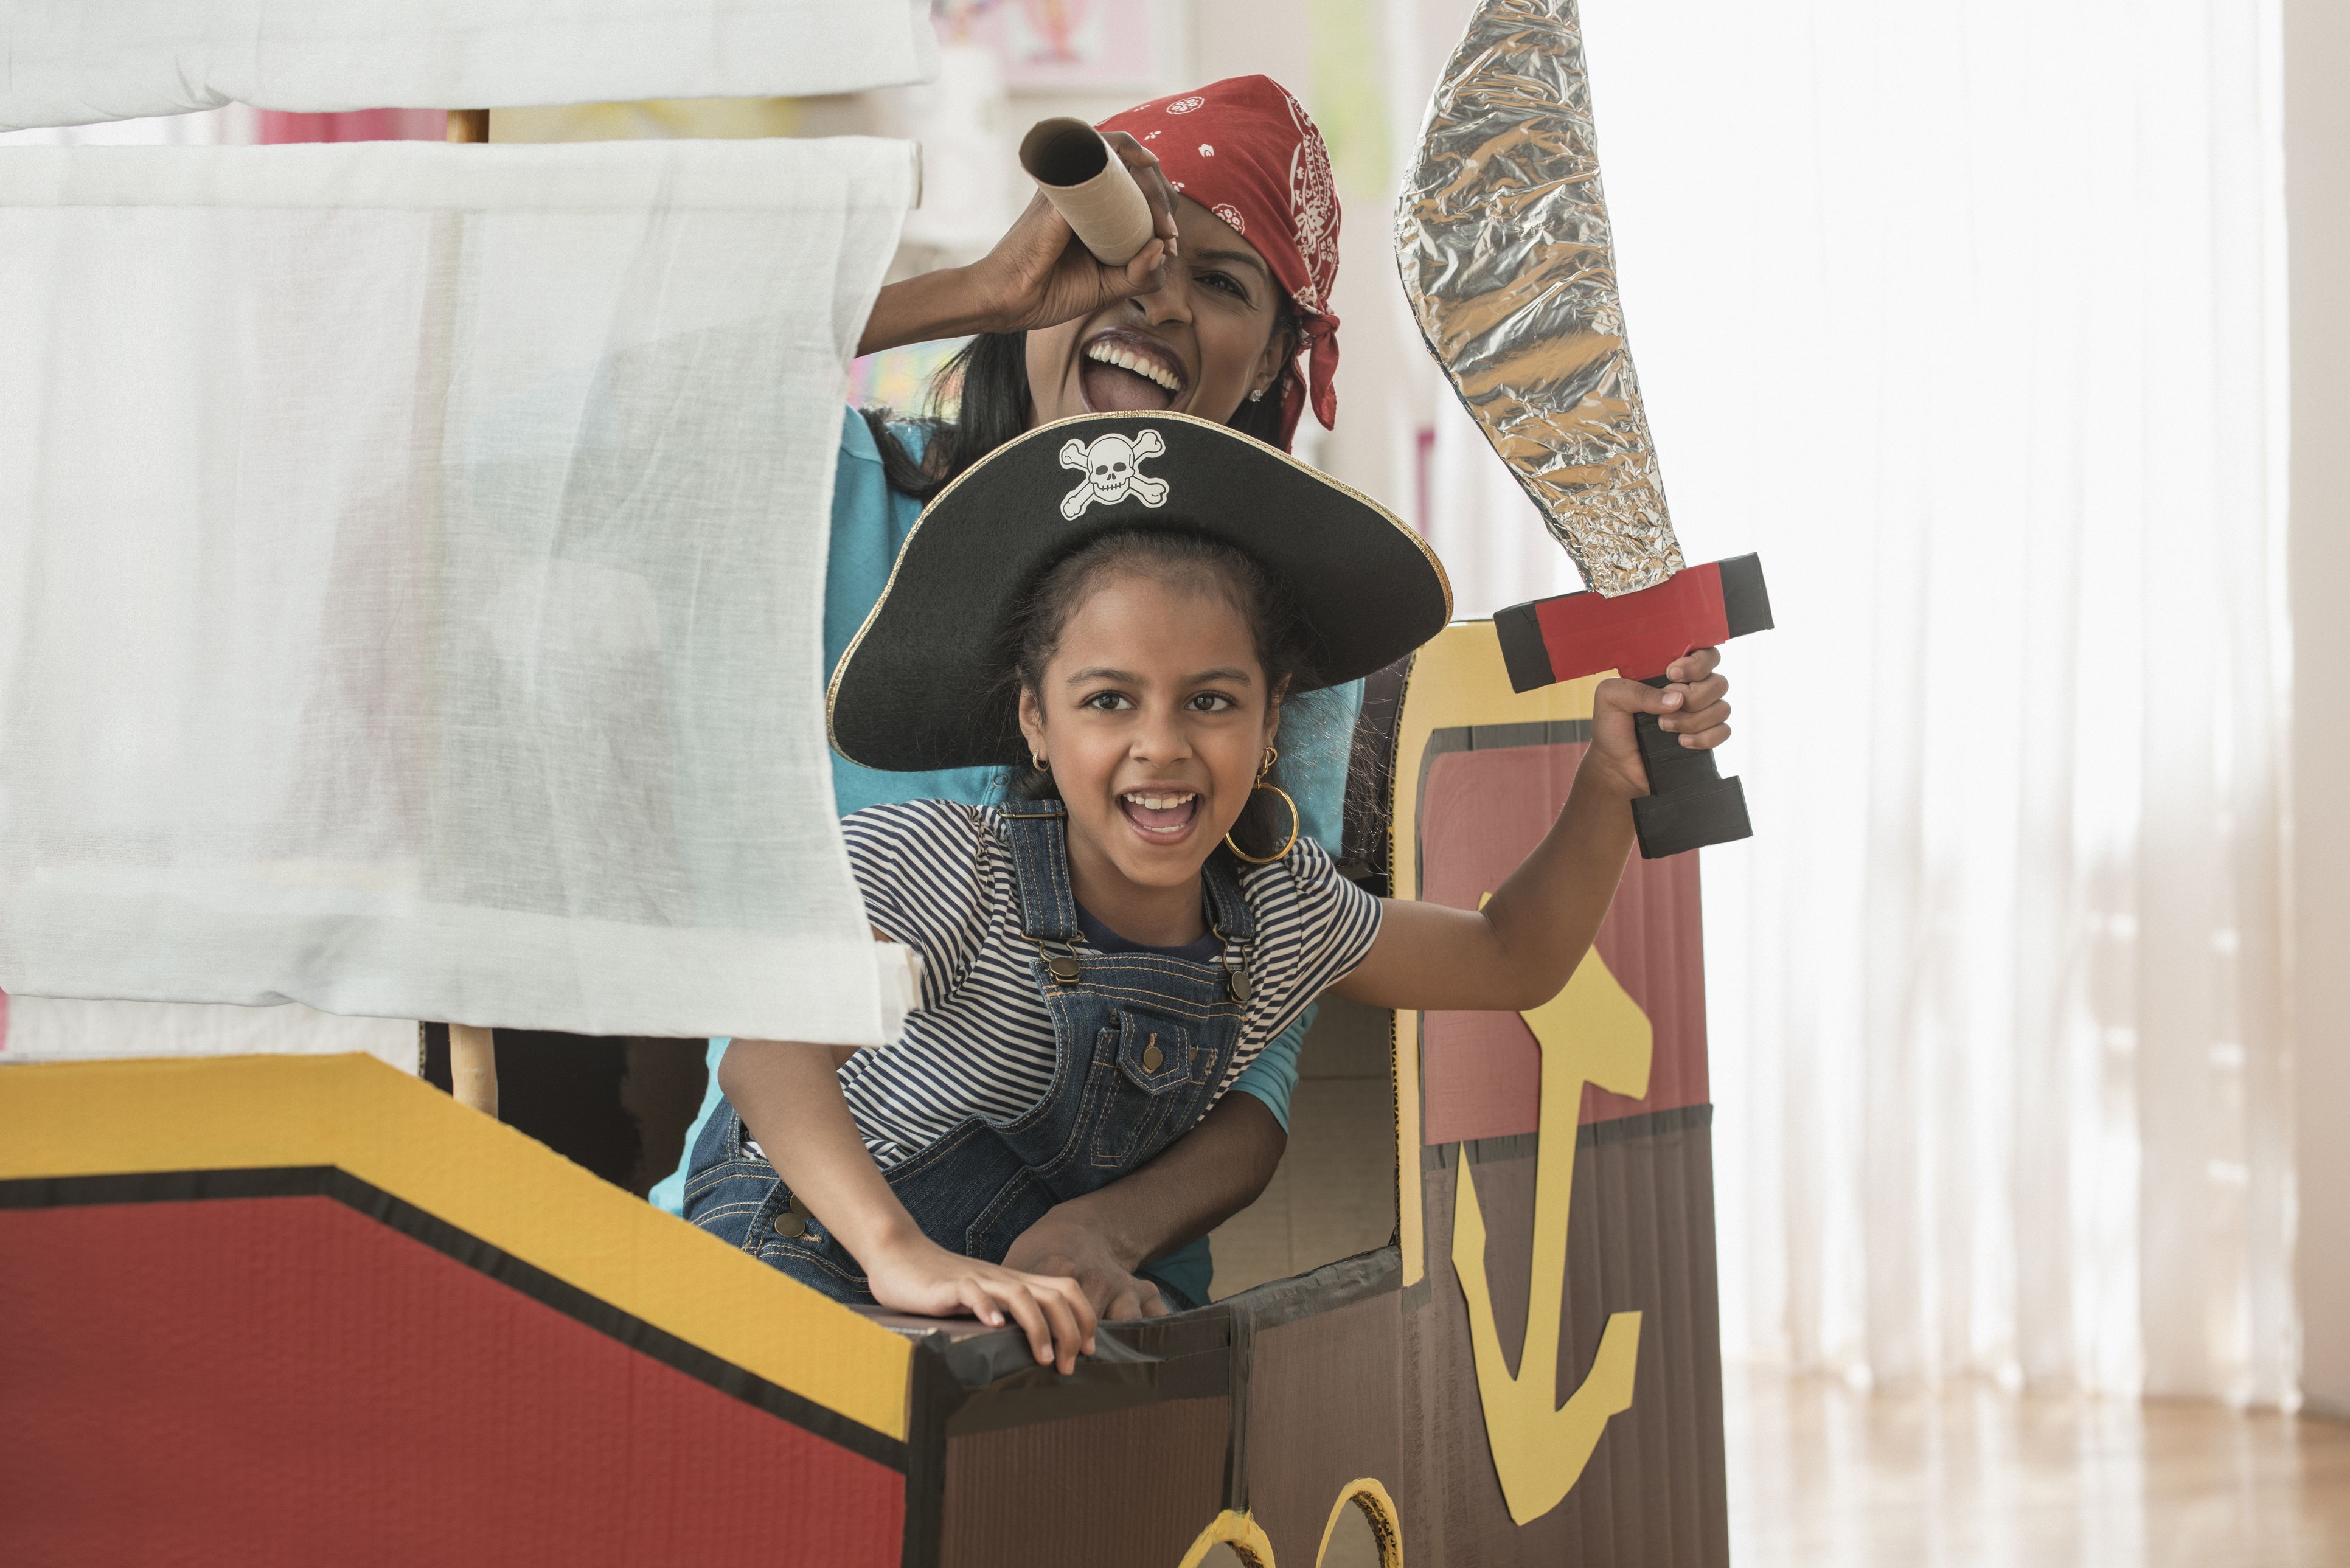 DIY Pirate Costume - How to Make a Pirate Halloween Costume